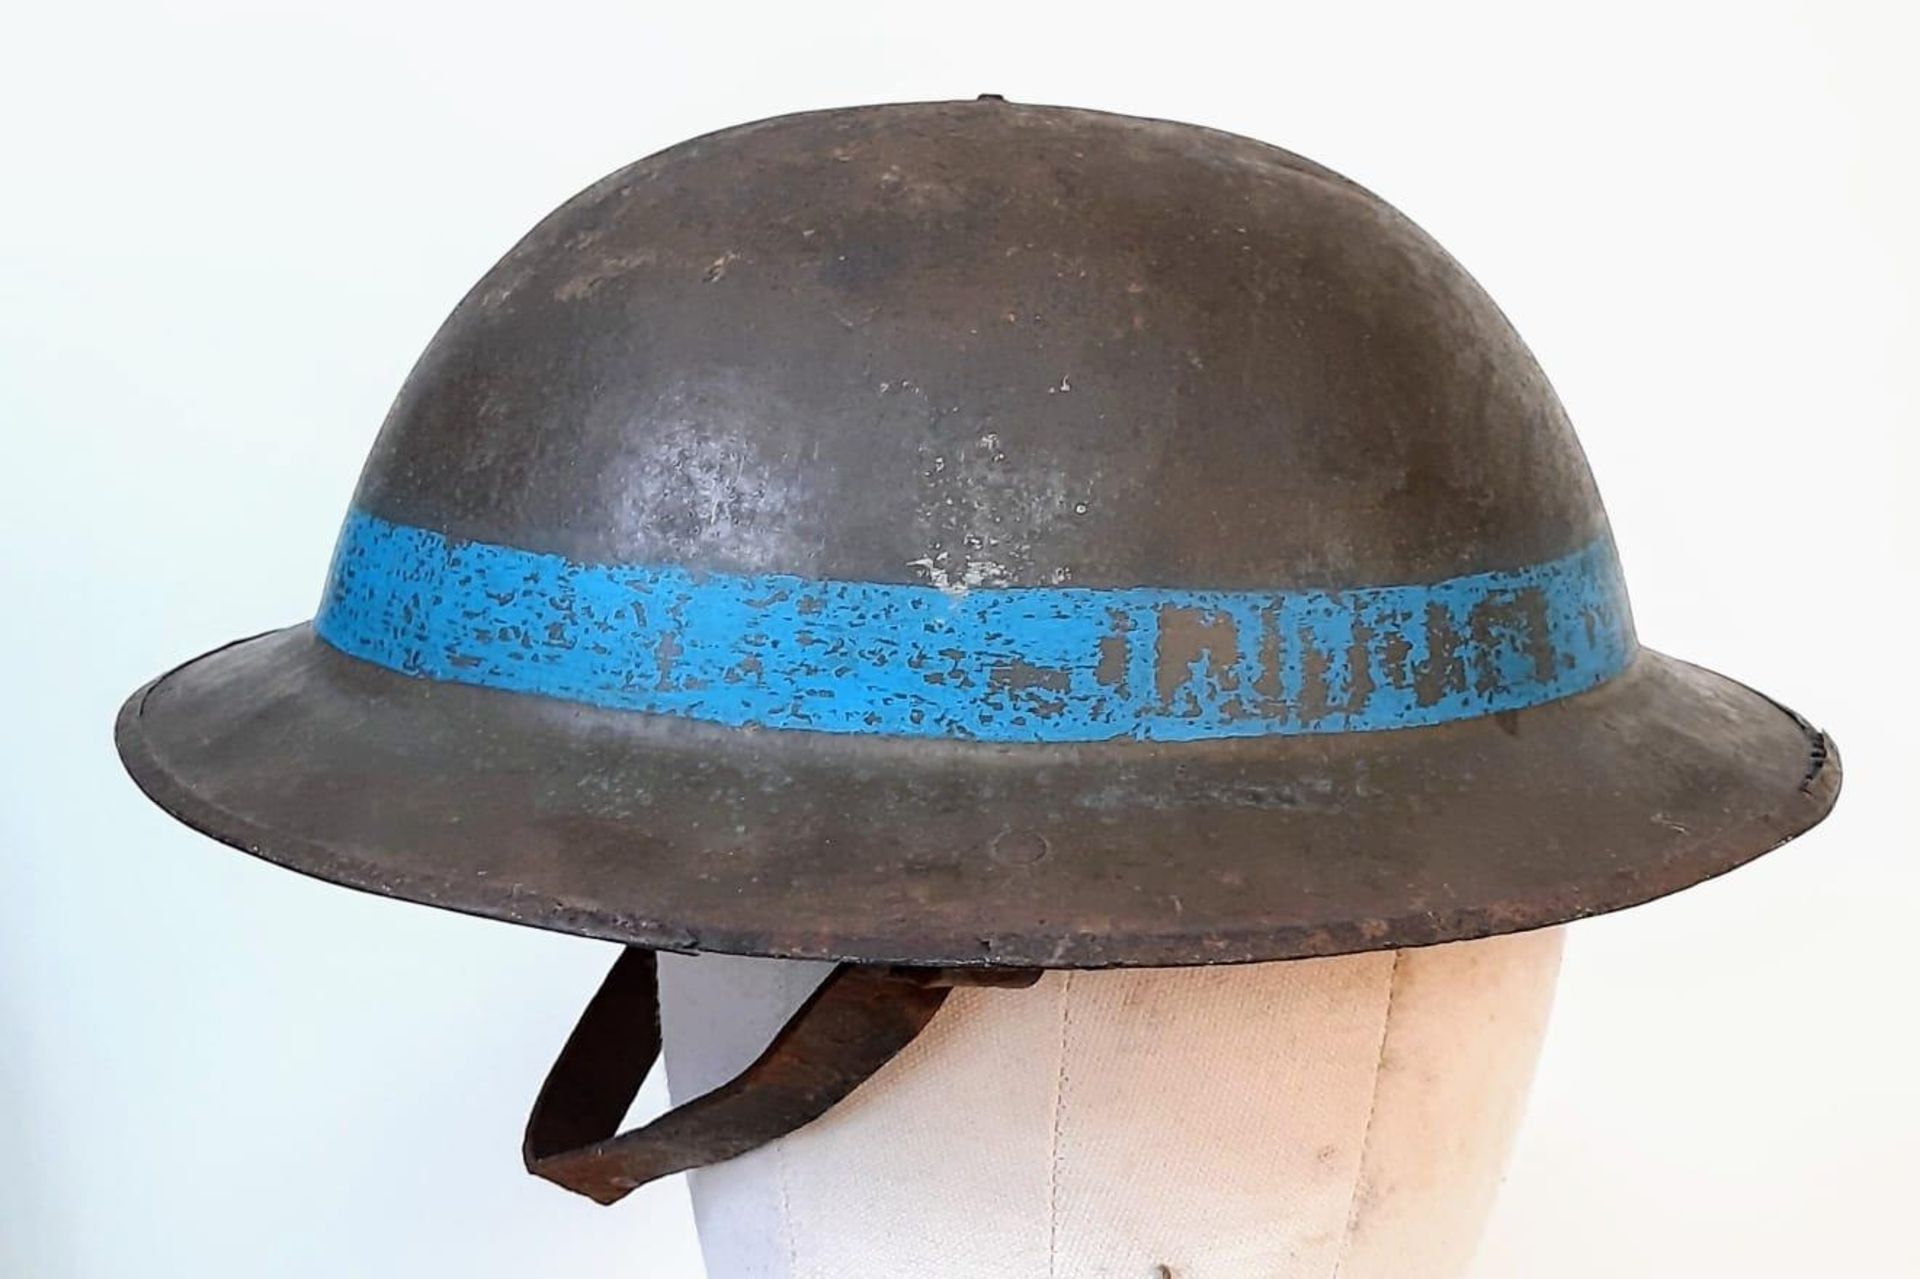 WW1 British Brodie Helmet with Blue Band for the 1st Bn East Yorks circa 1918. Lots of the - Bild 2 aus 7